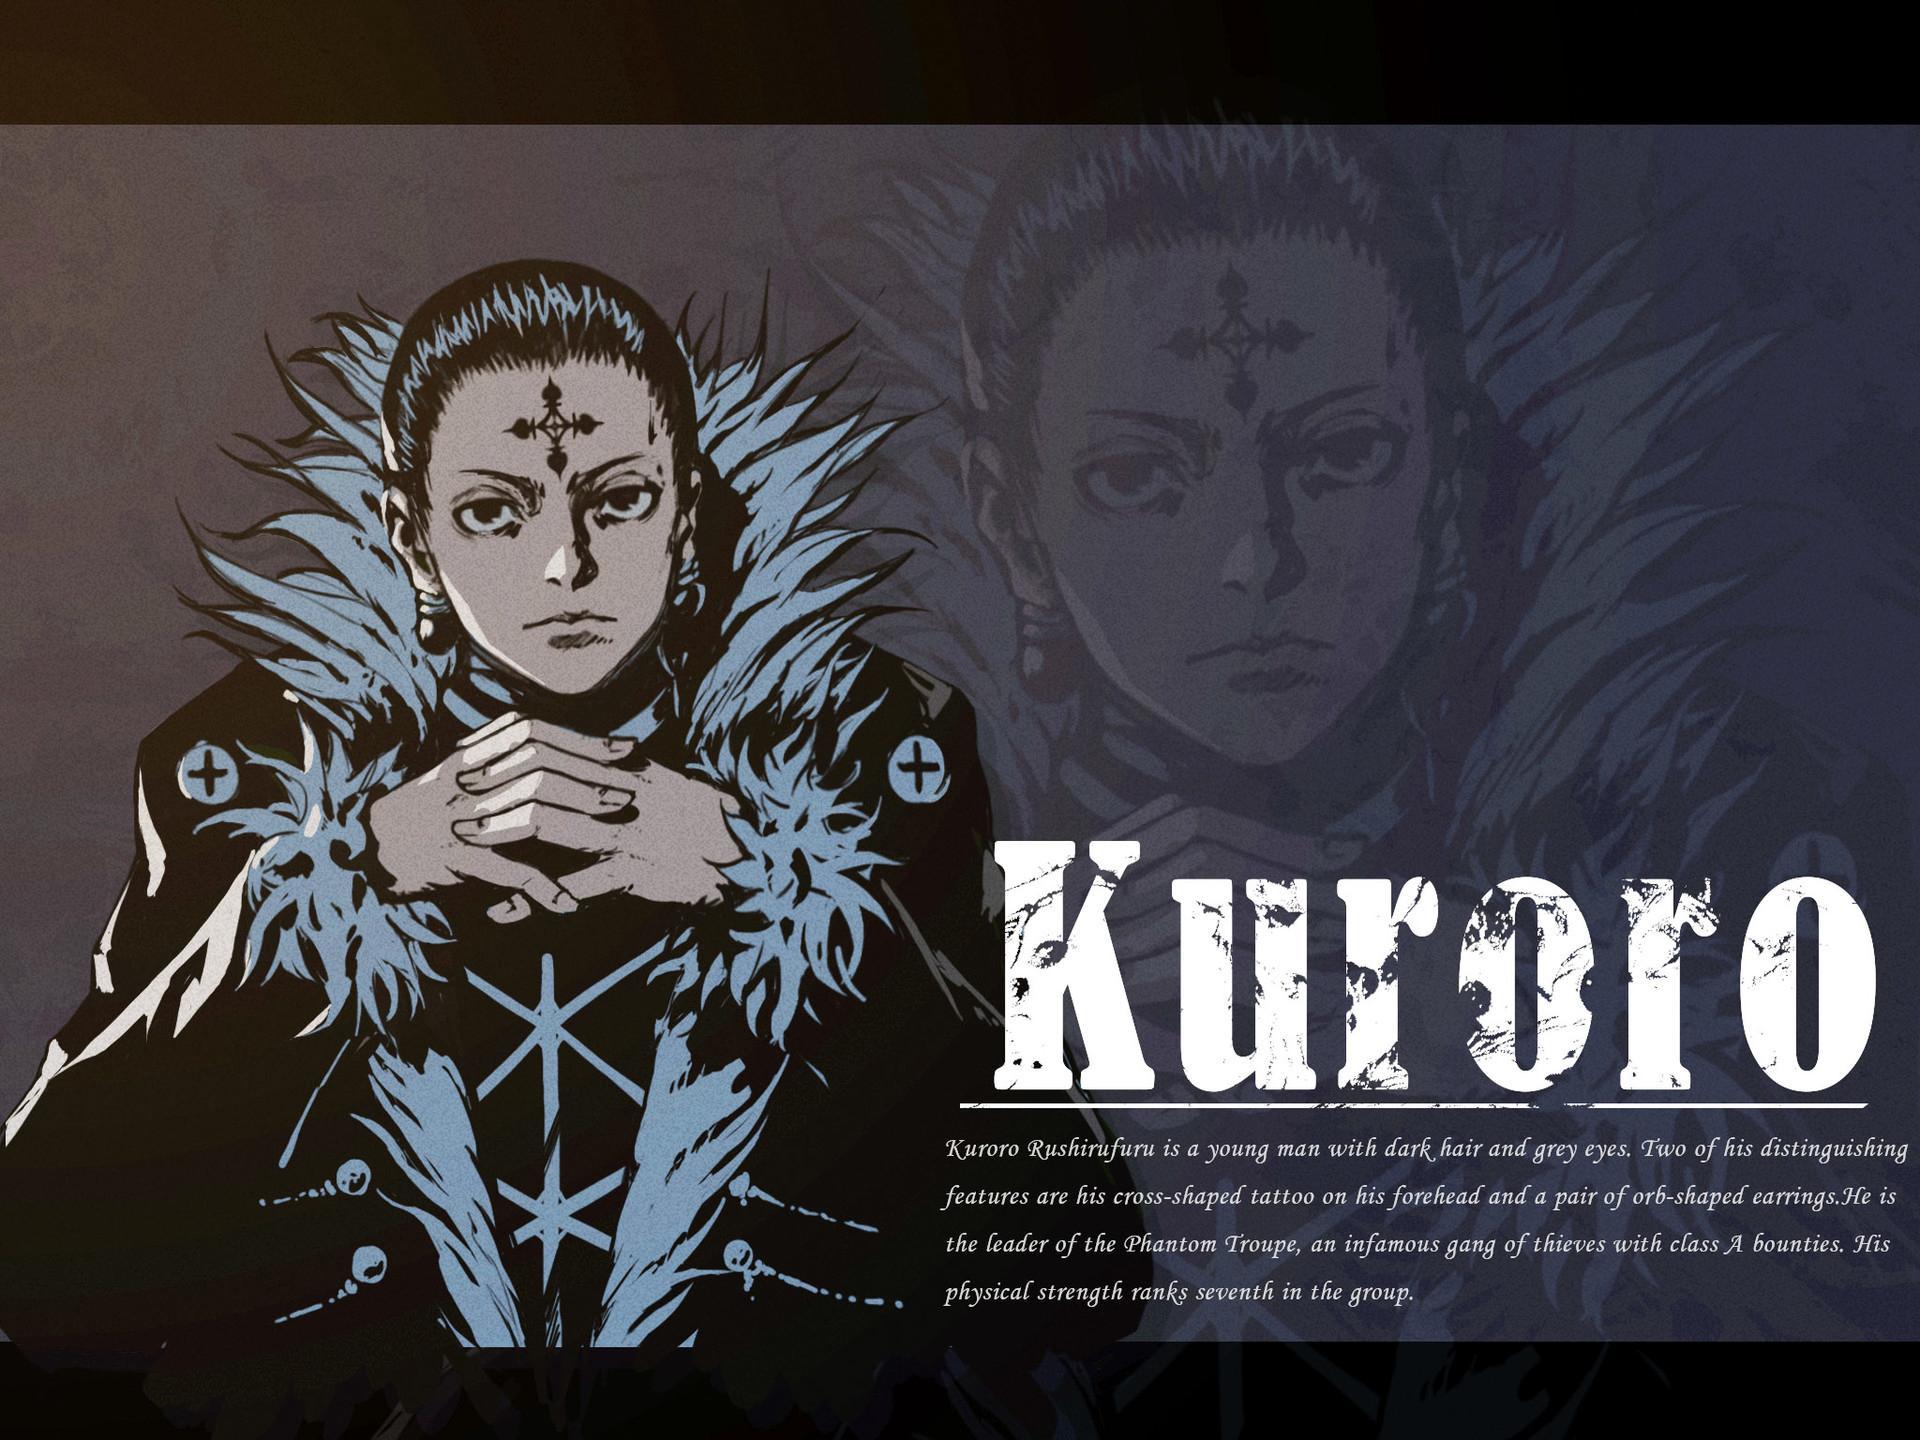 Phantom Troupe Wallpaper, image collections of wallpaper